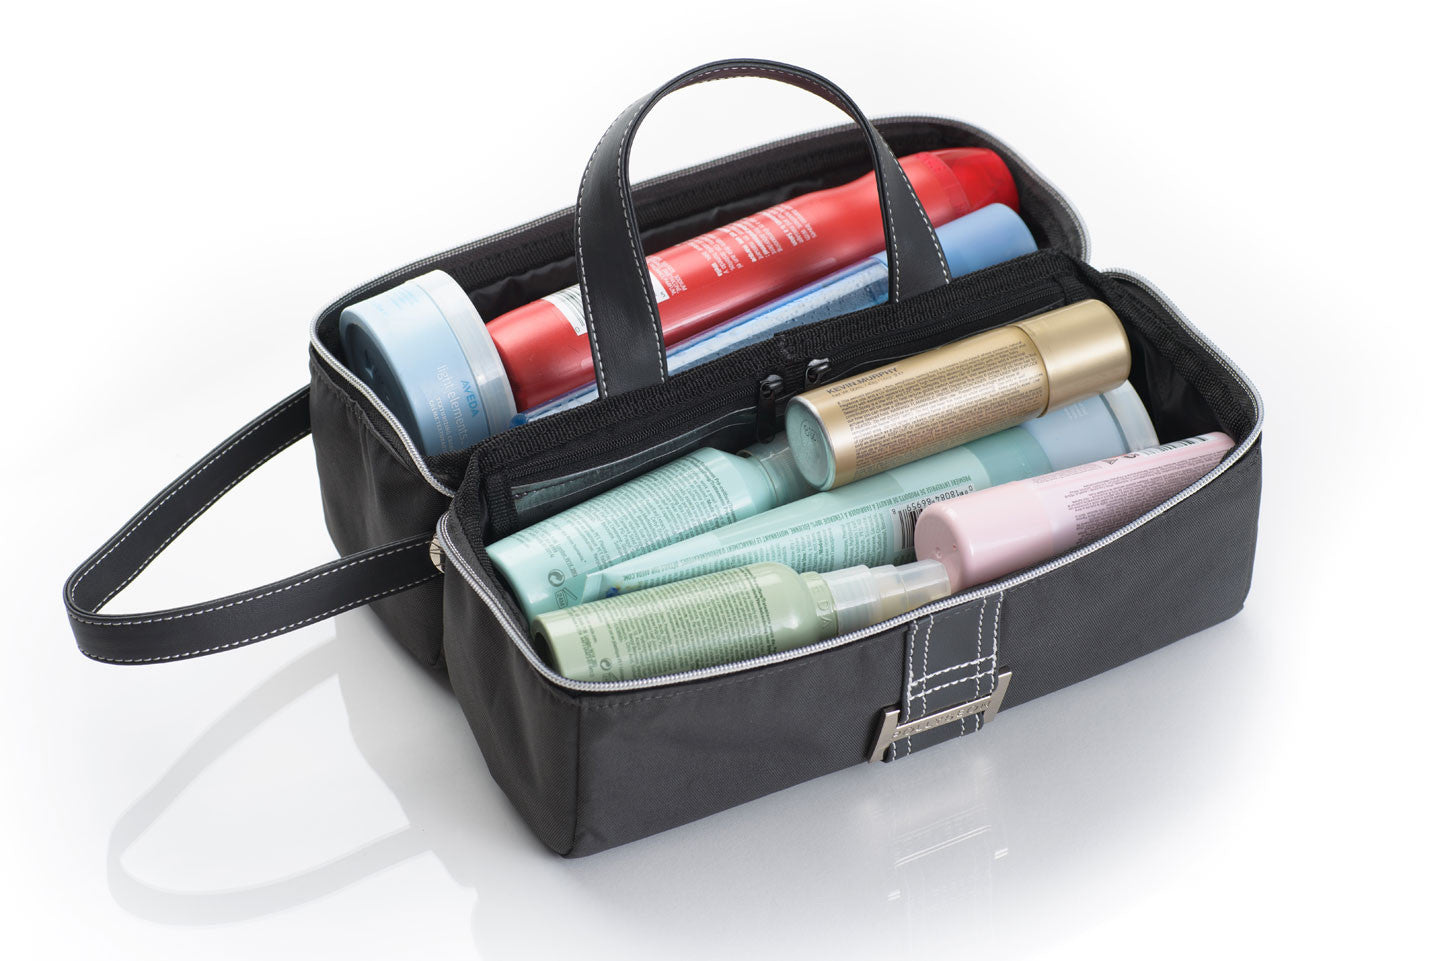 Stow-N-Go travel luggage organizer: Why I can't travel without it